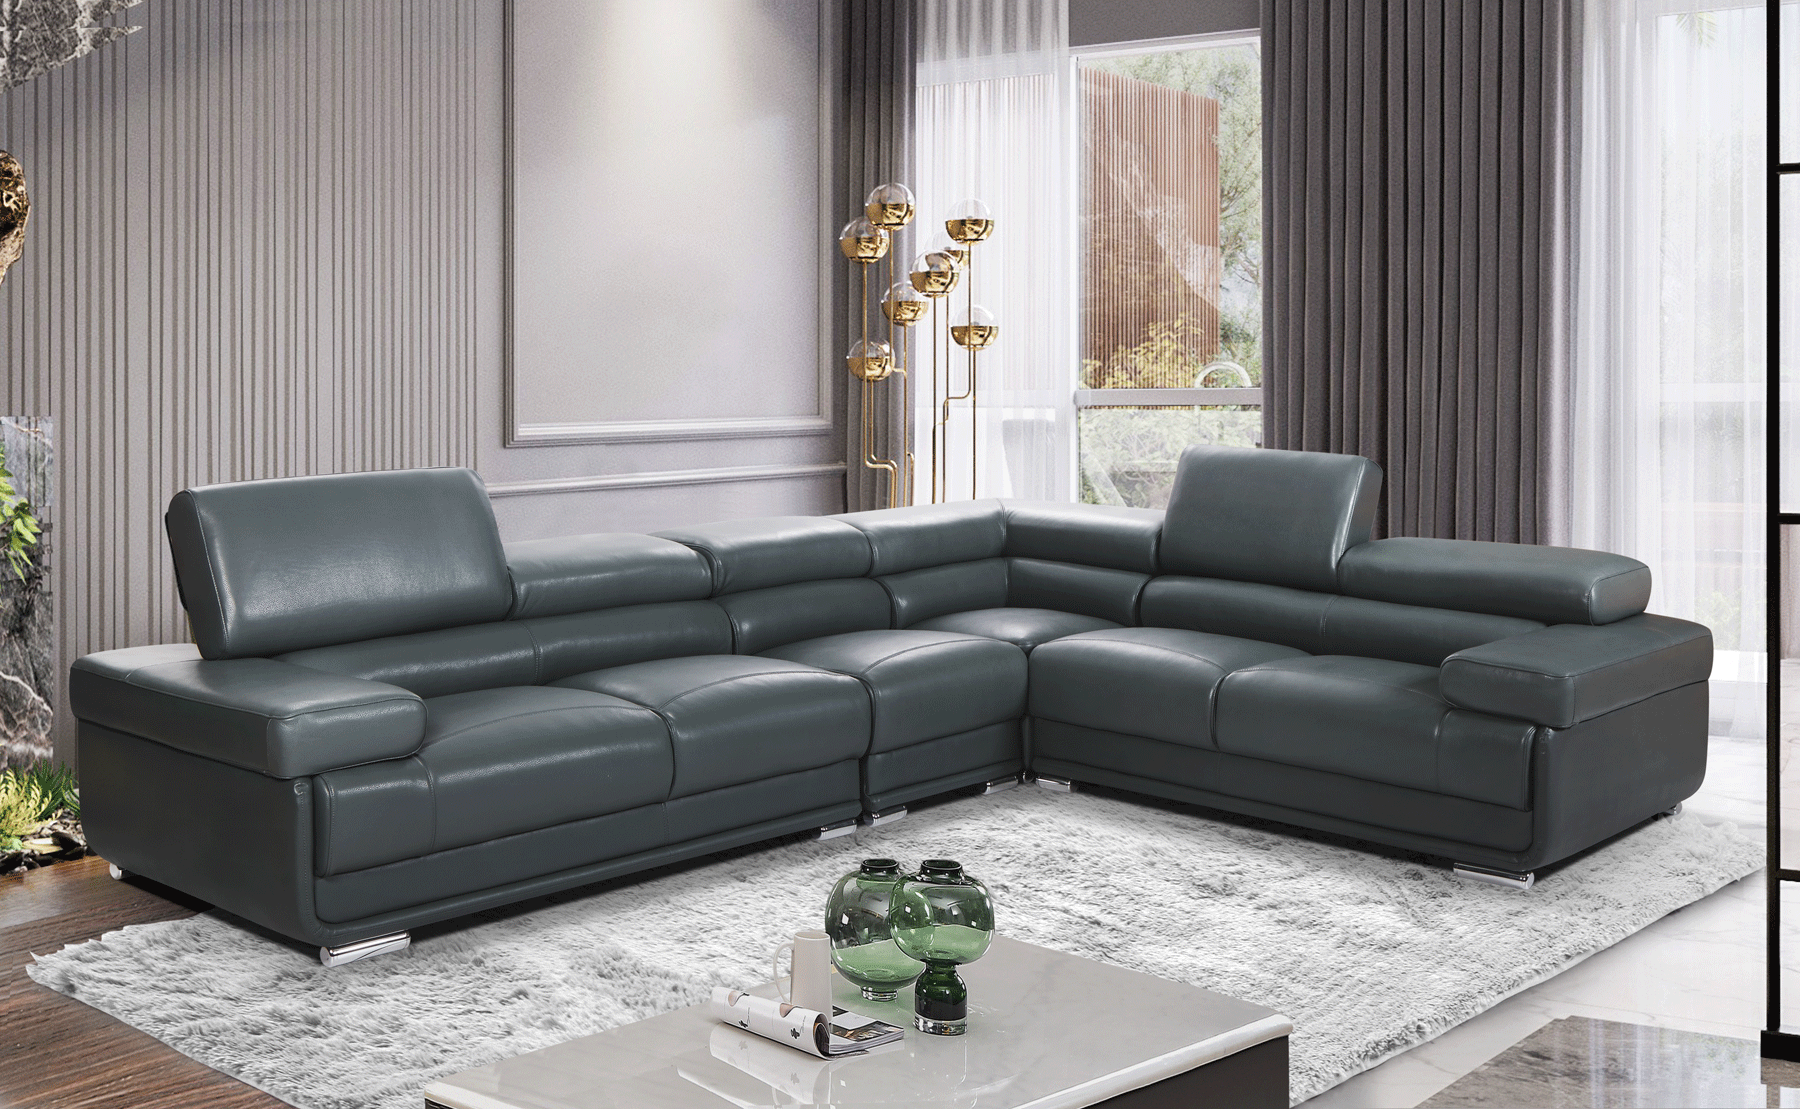 Living Room Furniture Sofas Loveseats and Chairs 2119 Sectional Dark Grey